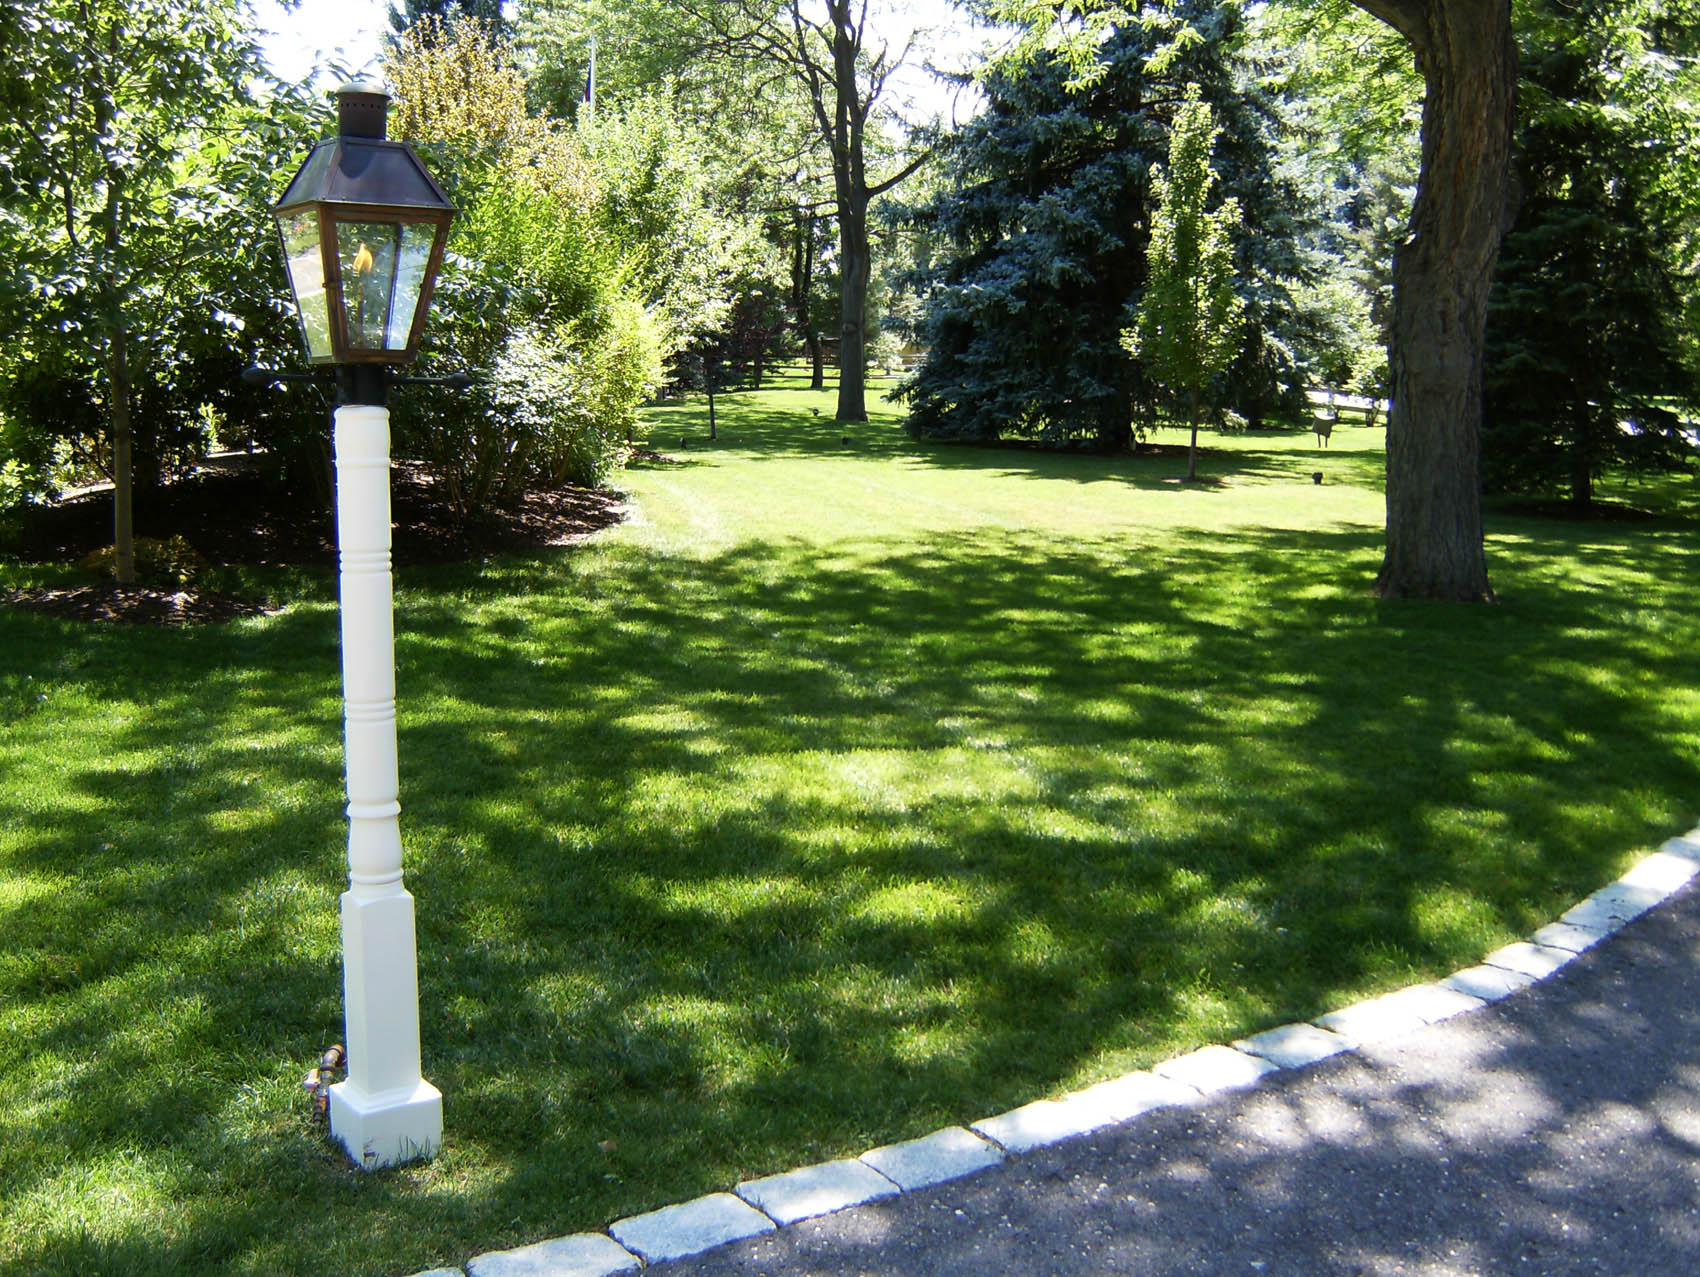 An antique-style street lamp stands prominently in a lush, well-manicured park with green grass, trees, and a curved paved path lined with white stones.